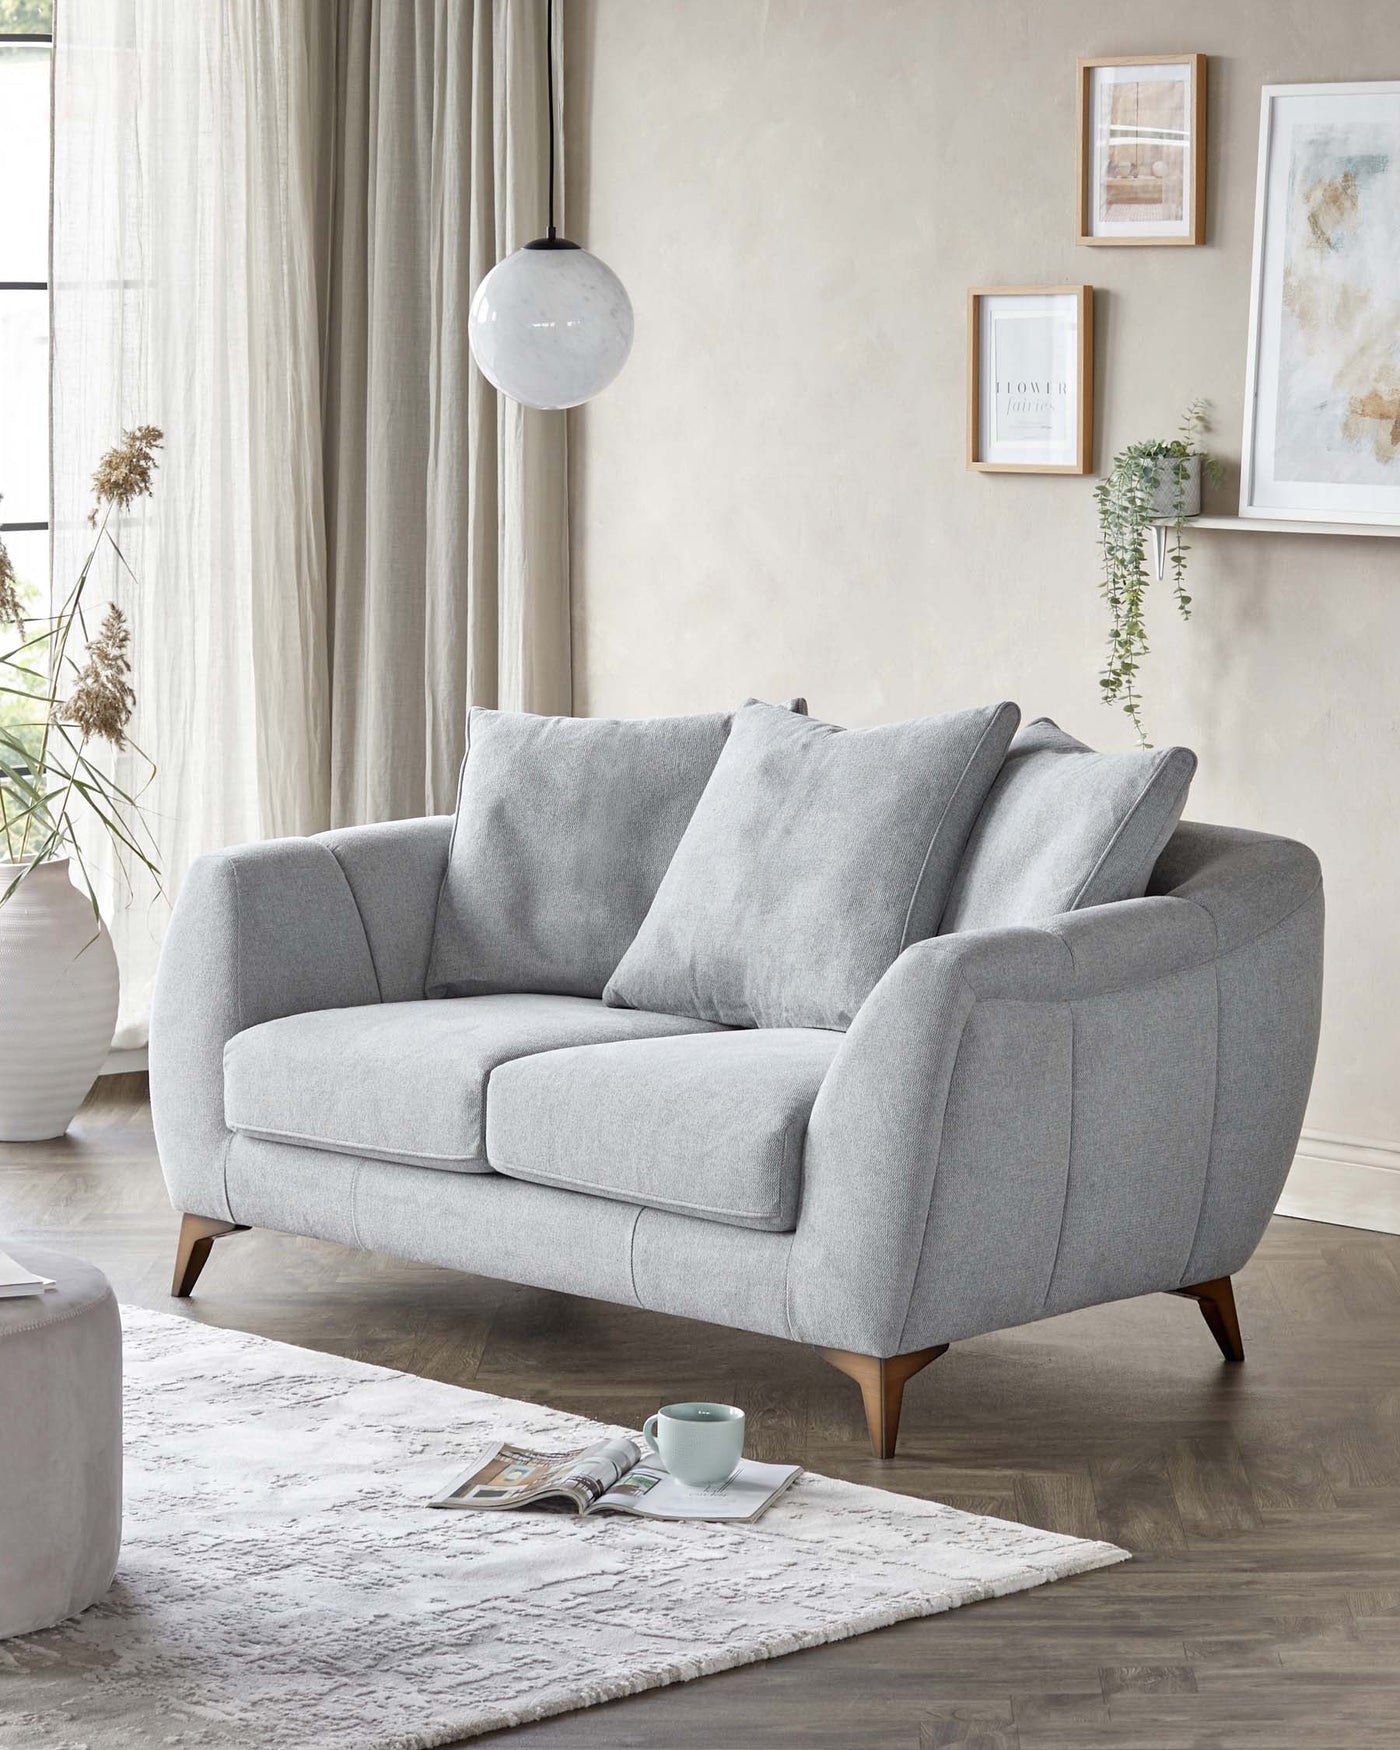 A modern mid-century-inspired grey fabric sofa with a curled armrest design, featuring plush back cushions and a tufted seat cushion, elevated on tapered wooden legs. In front of the sofa, there's a round, light grey ottoman, and underneath is an off-white textured area rug.